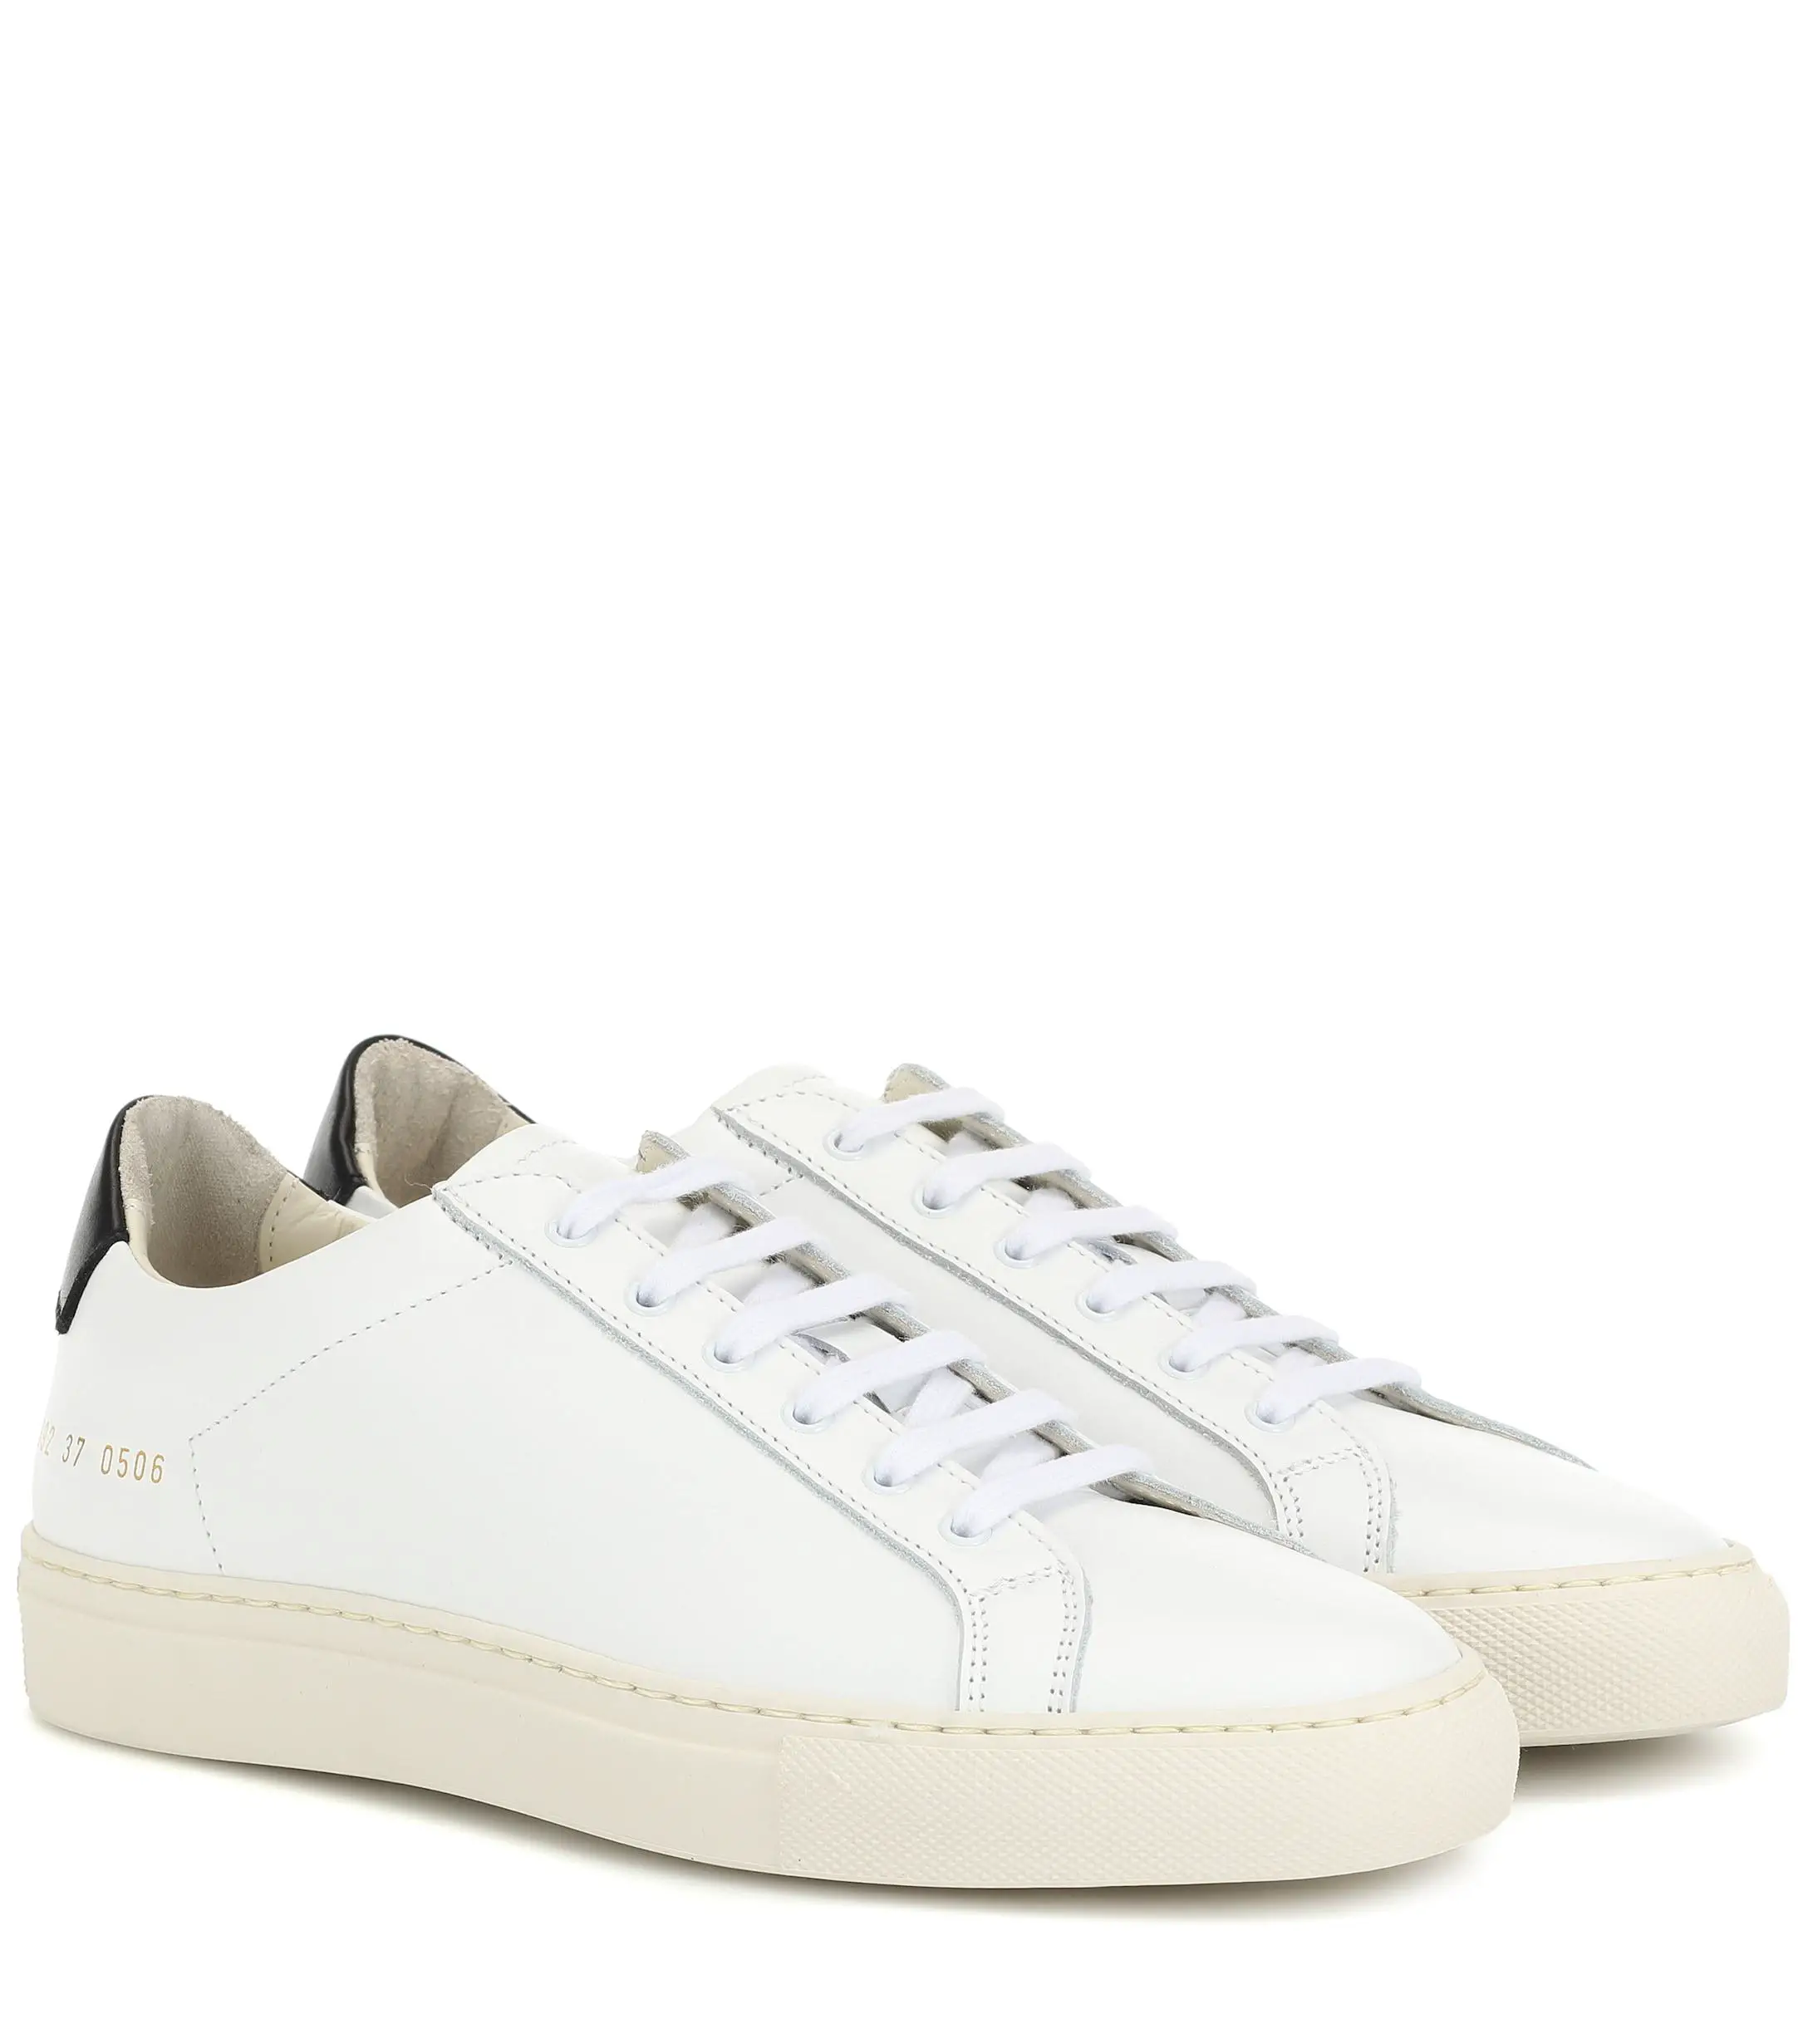 Common Projects Retro Leather Sneakers in White